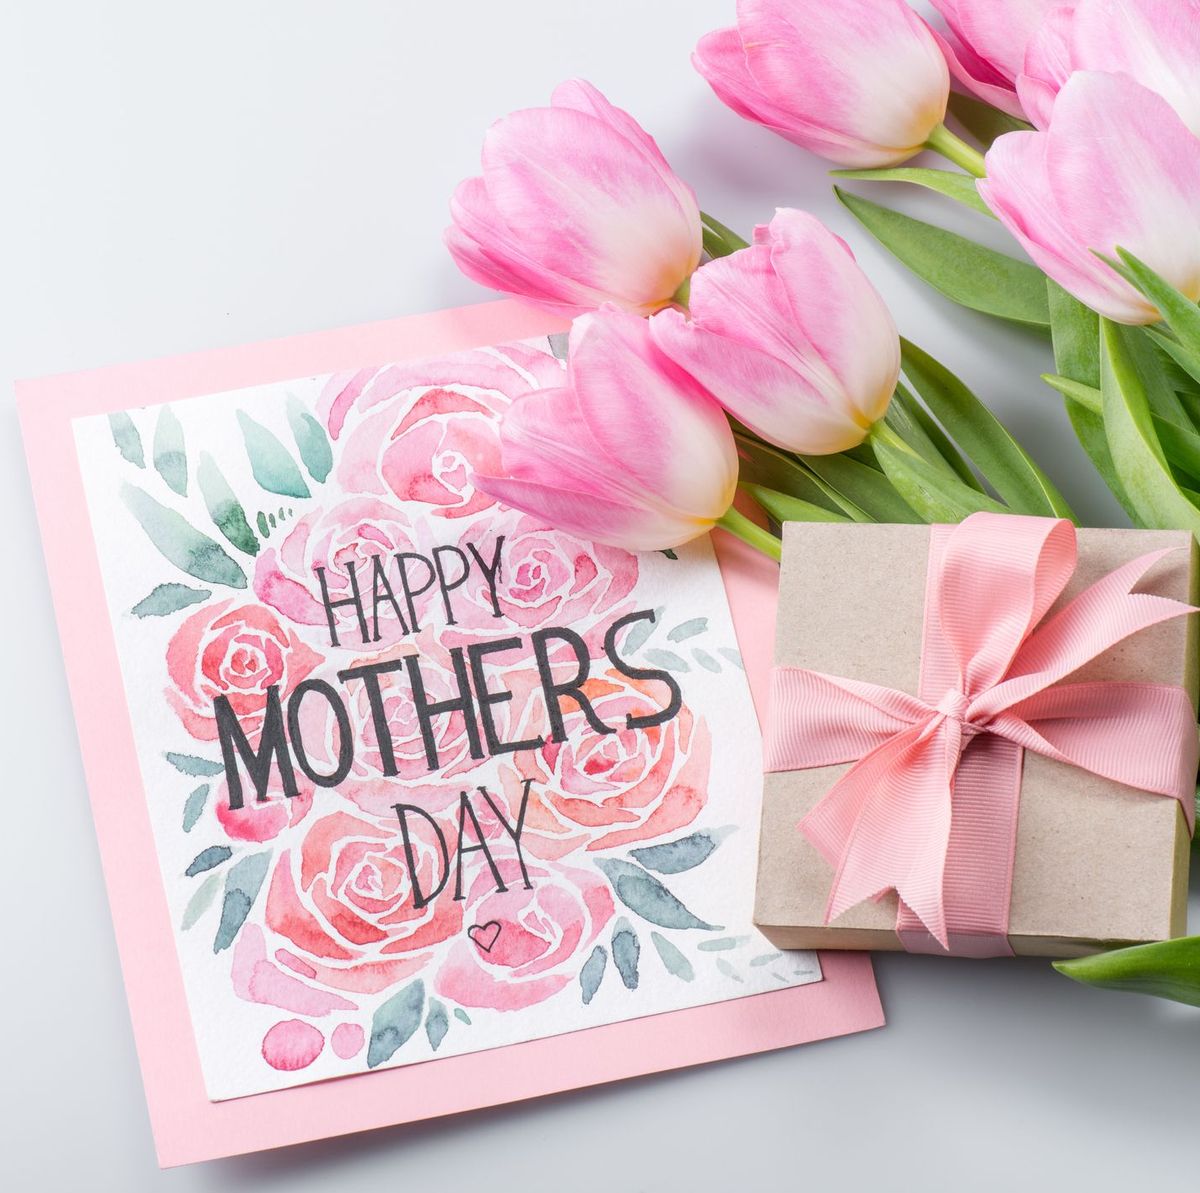 50 Mother's Day Card Messages and Wishes - What to Write in a ...